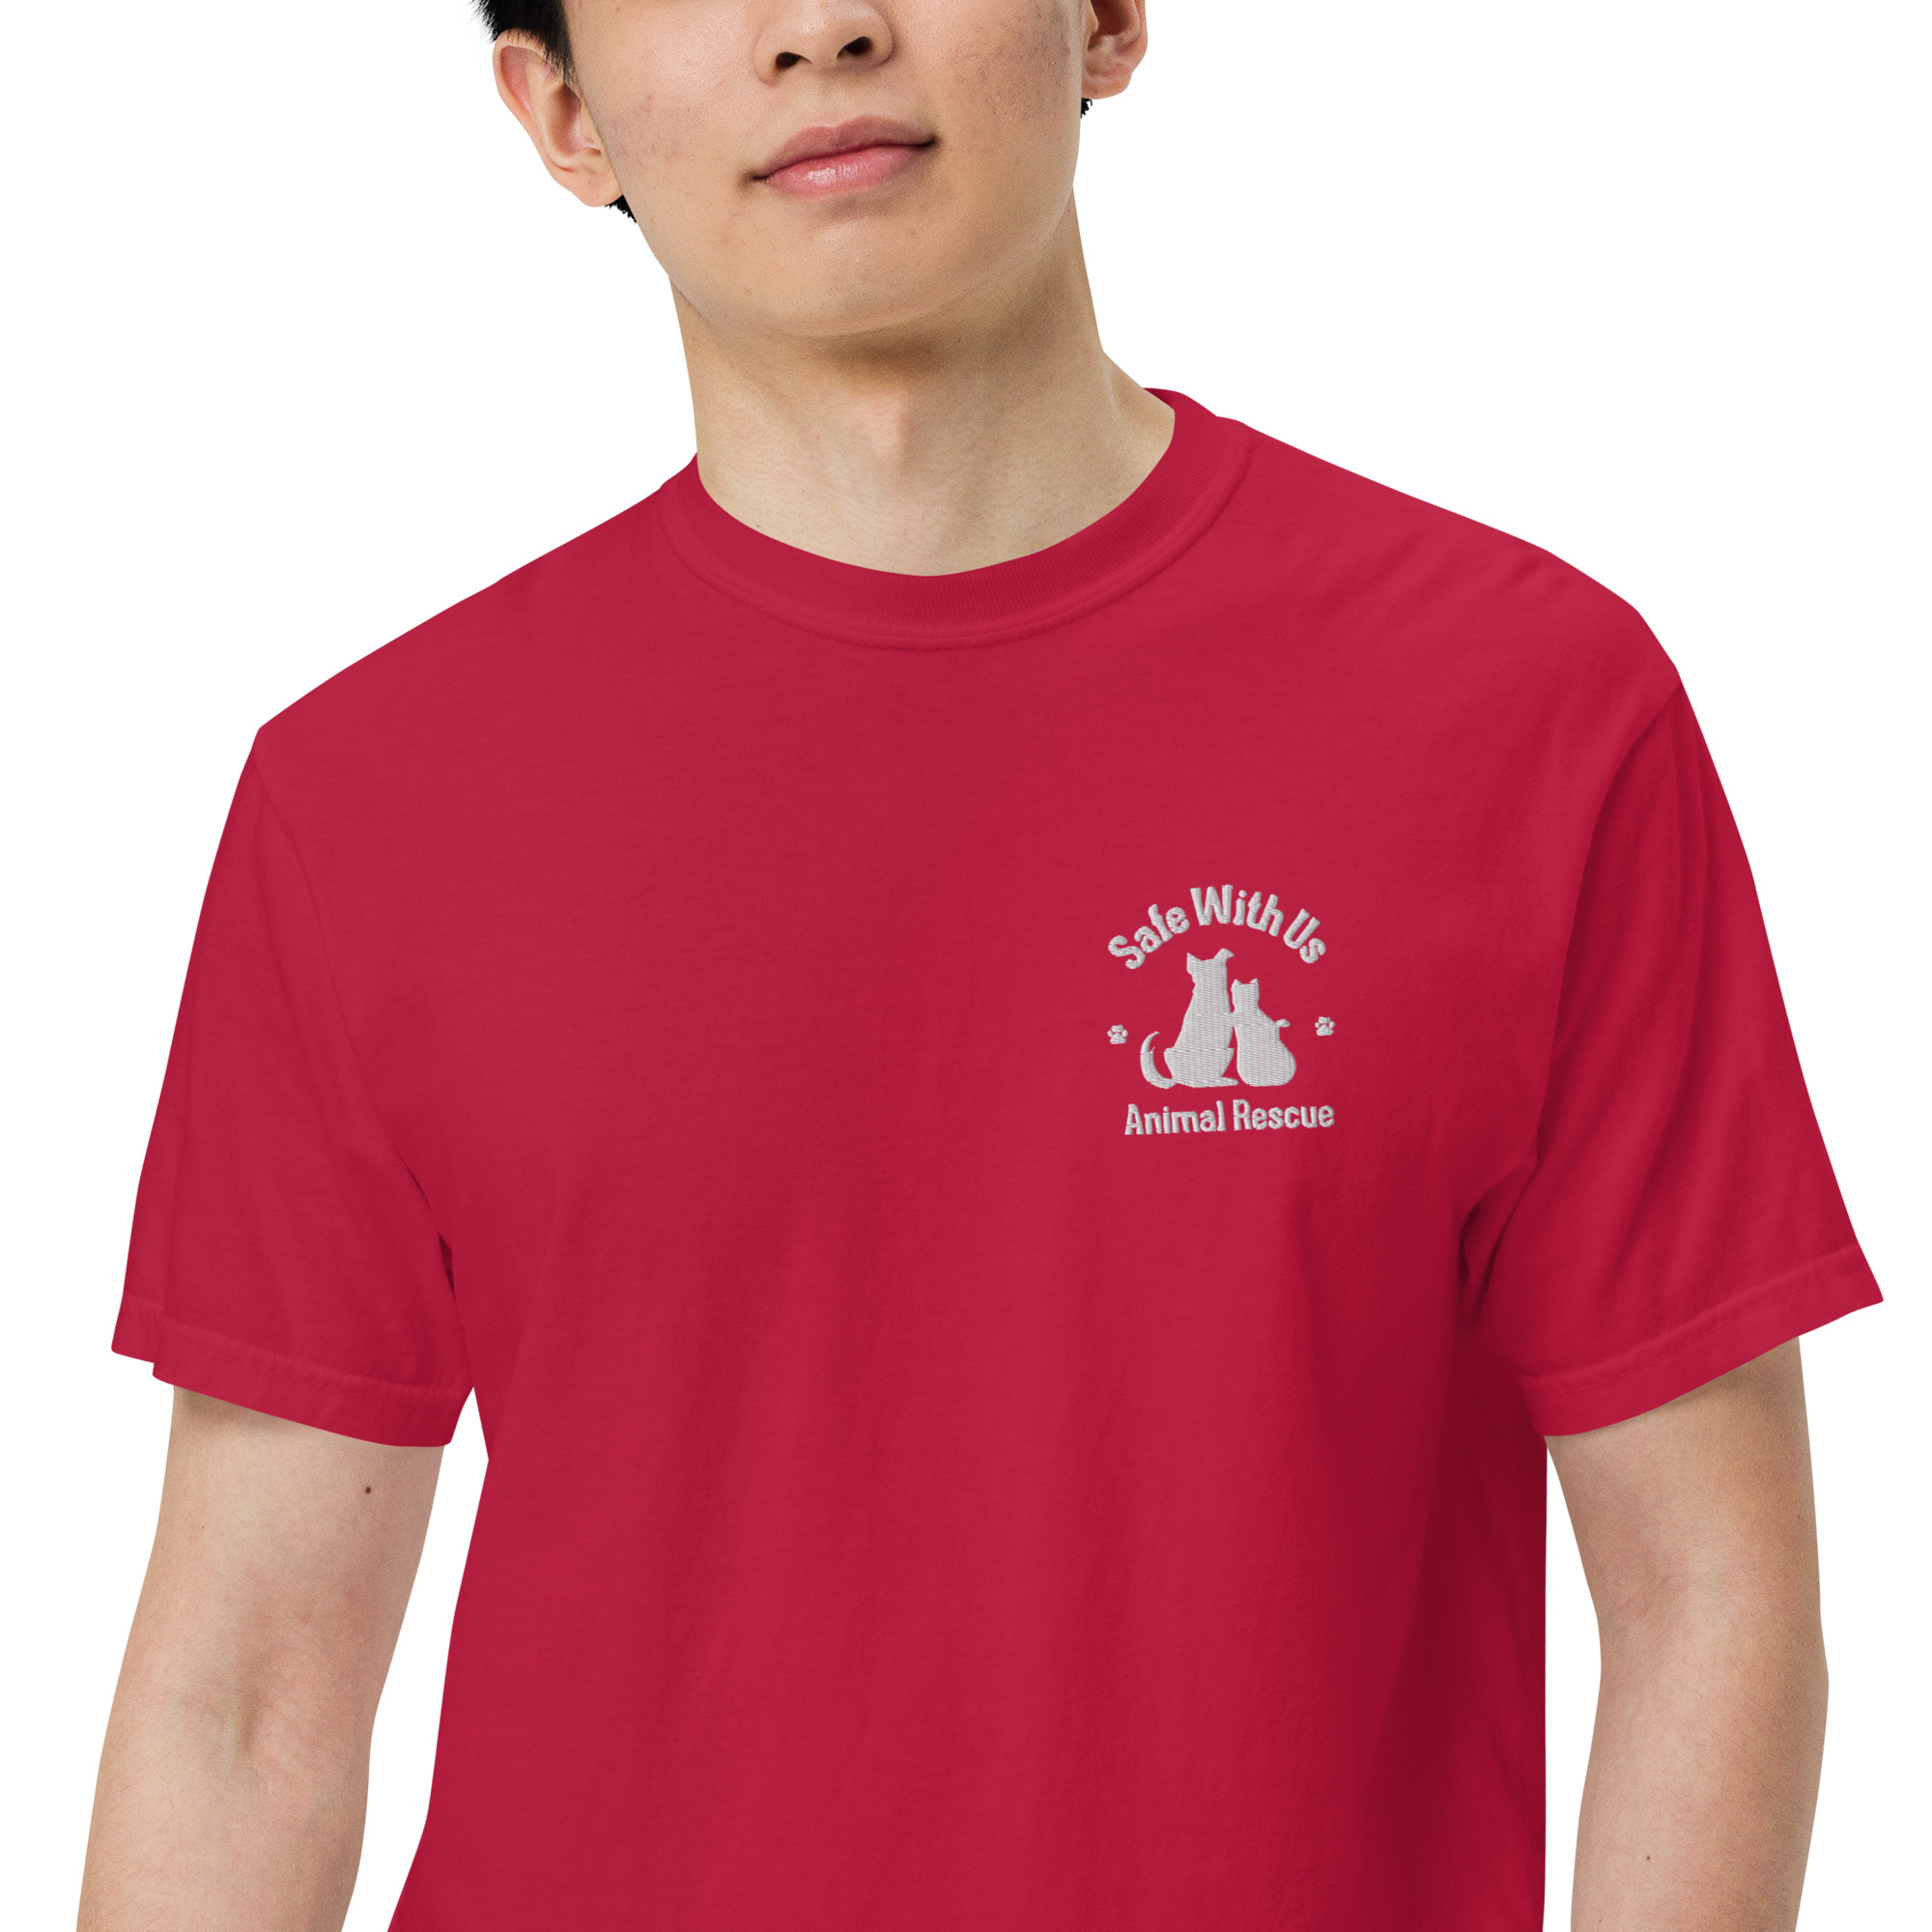 mens-garment-dyed-heavyweight-t-shirt-red-zoomed-in-2-641520bf84aac.jpg